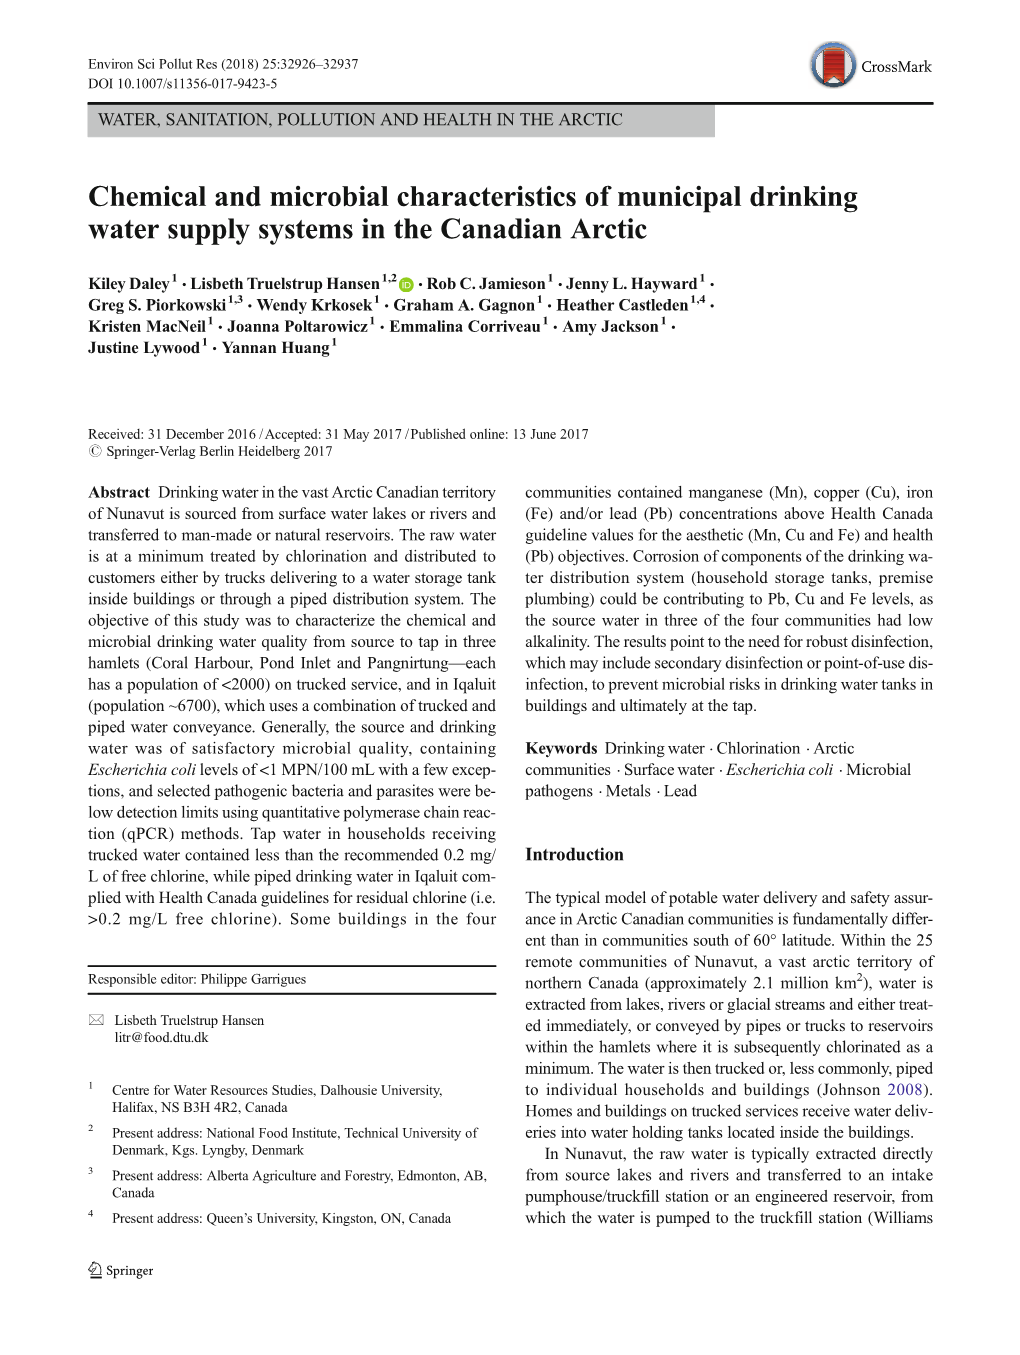 Chemical and Microbial Characteristics of Municipal Drinking Water Supply Systems in the Canadian Arctic